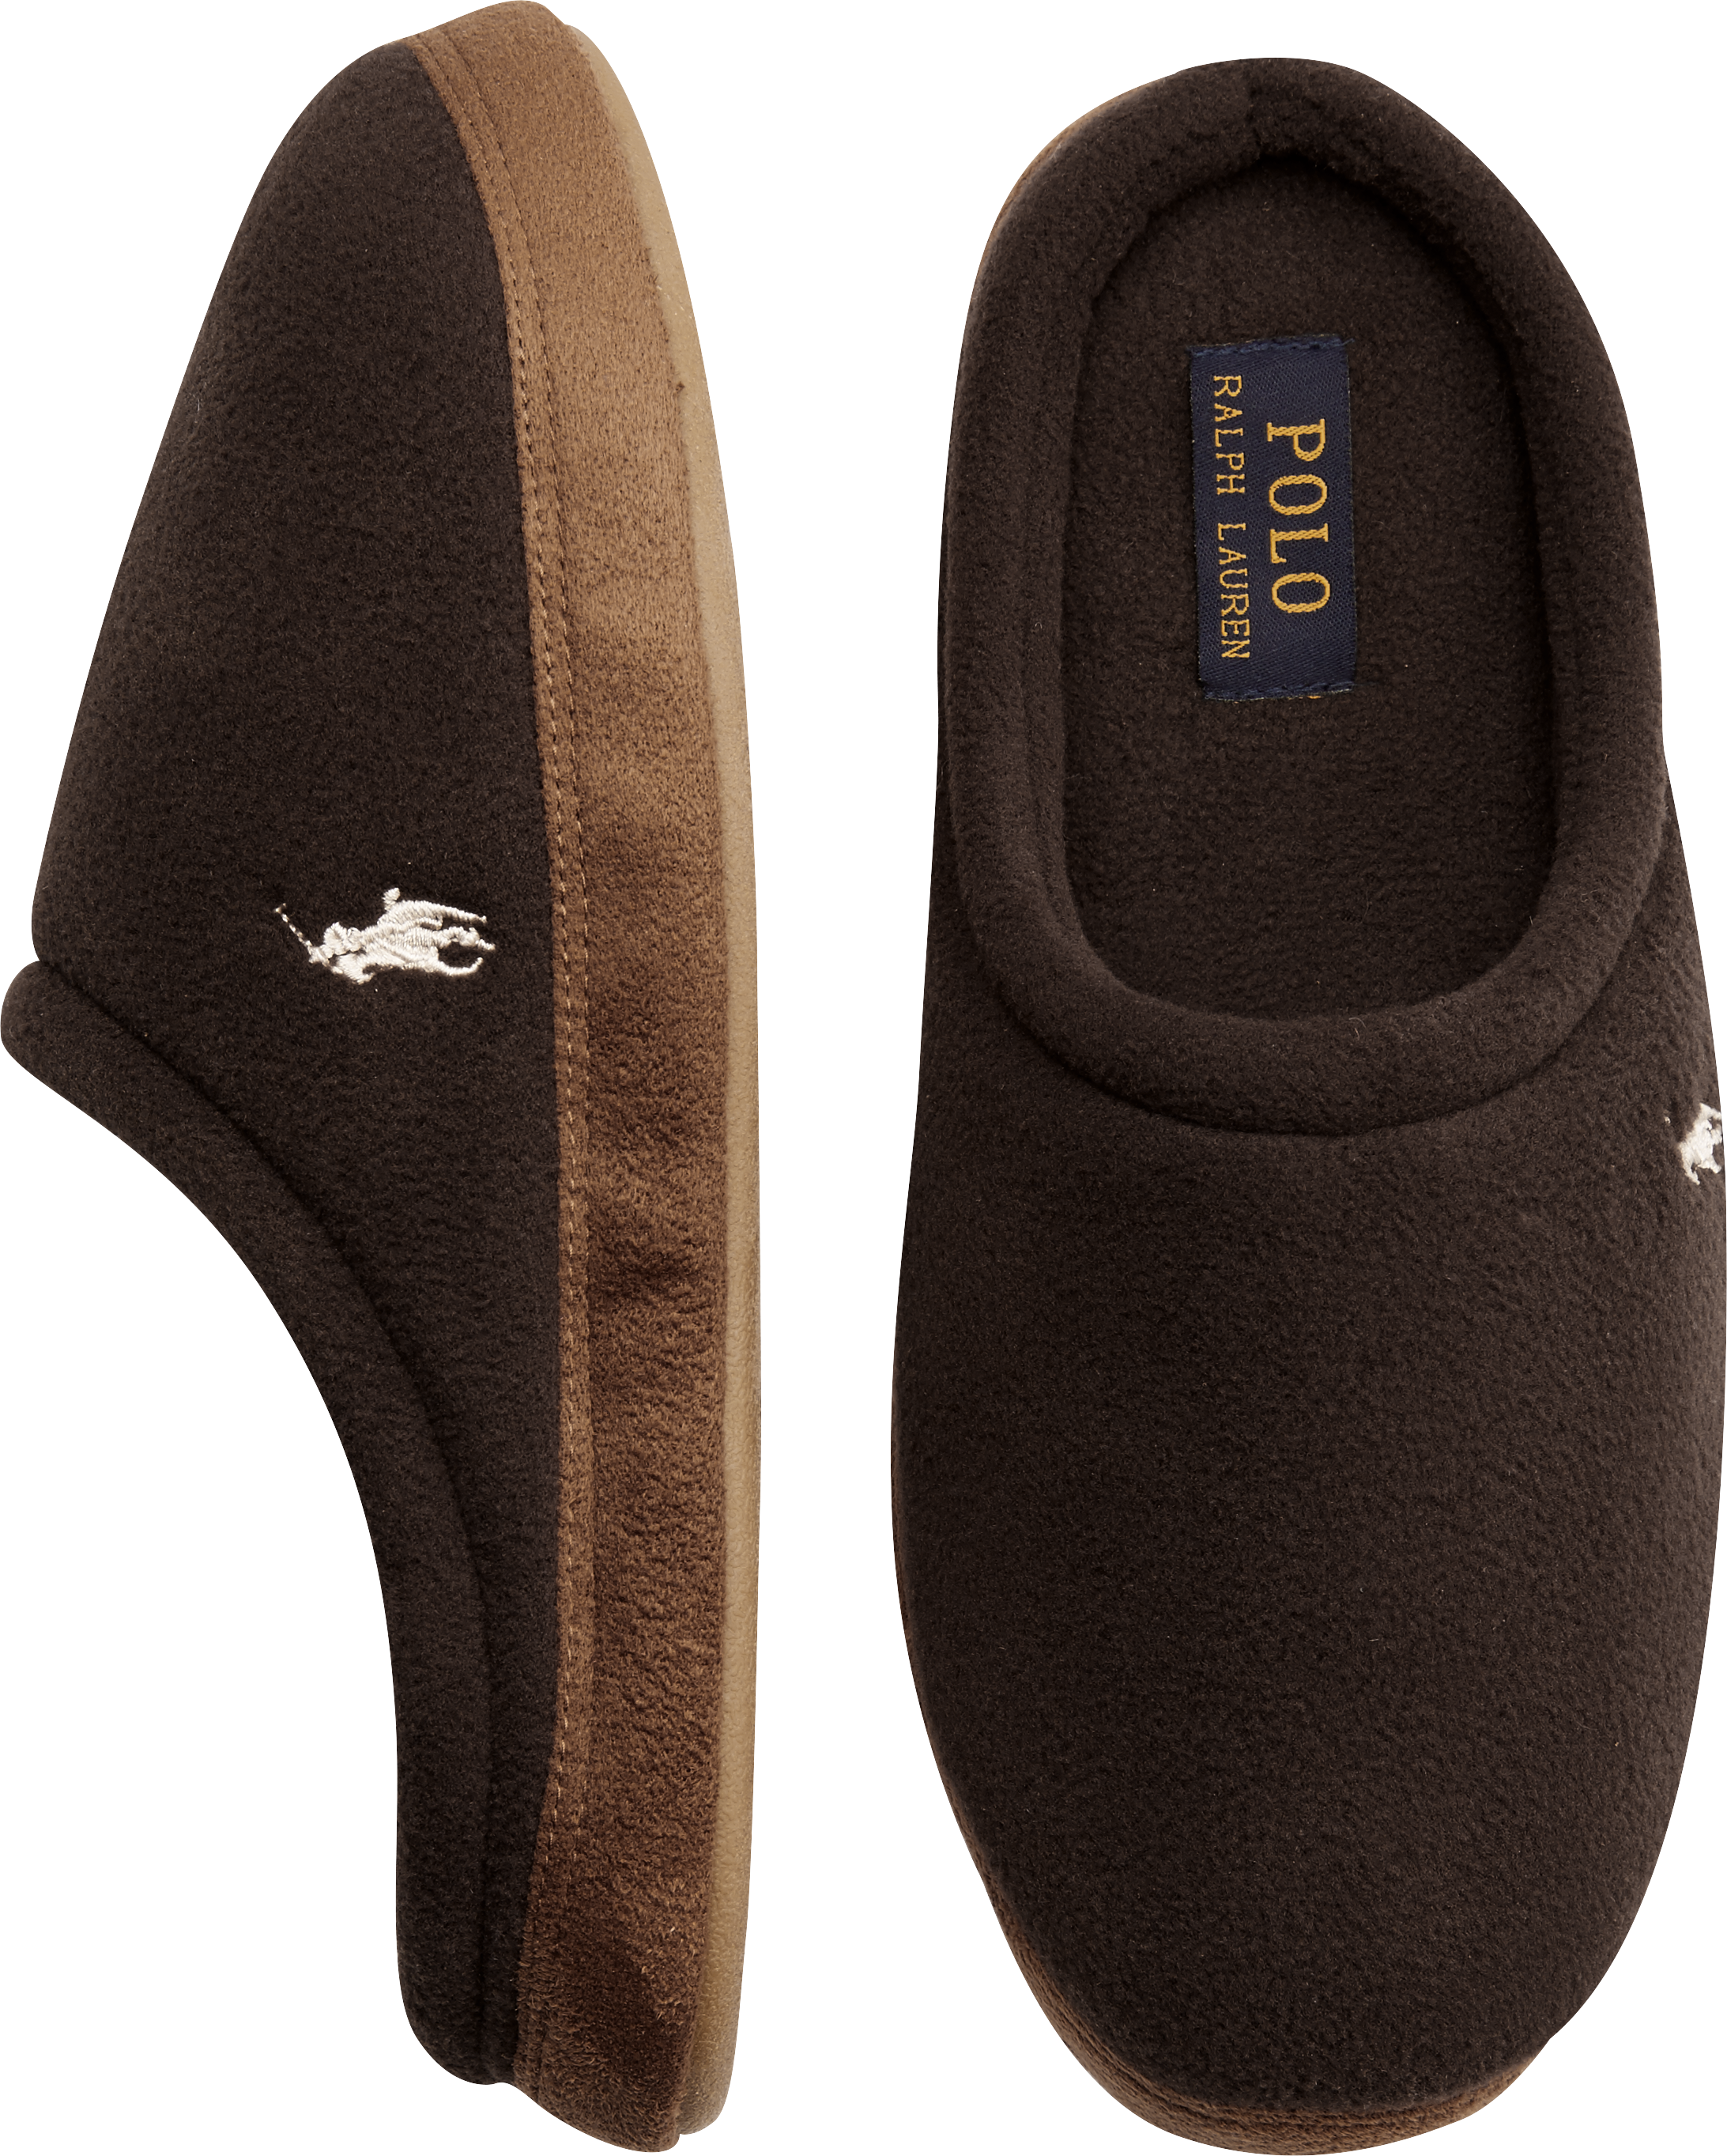 polo slippers